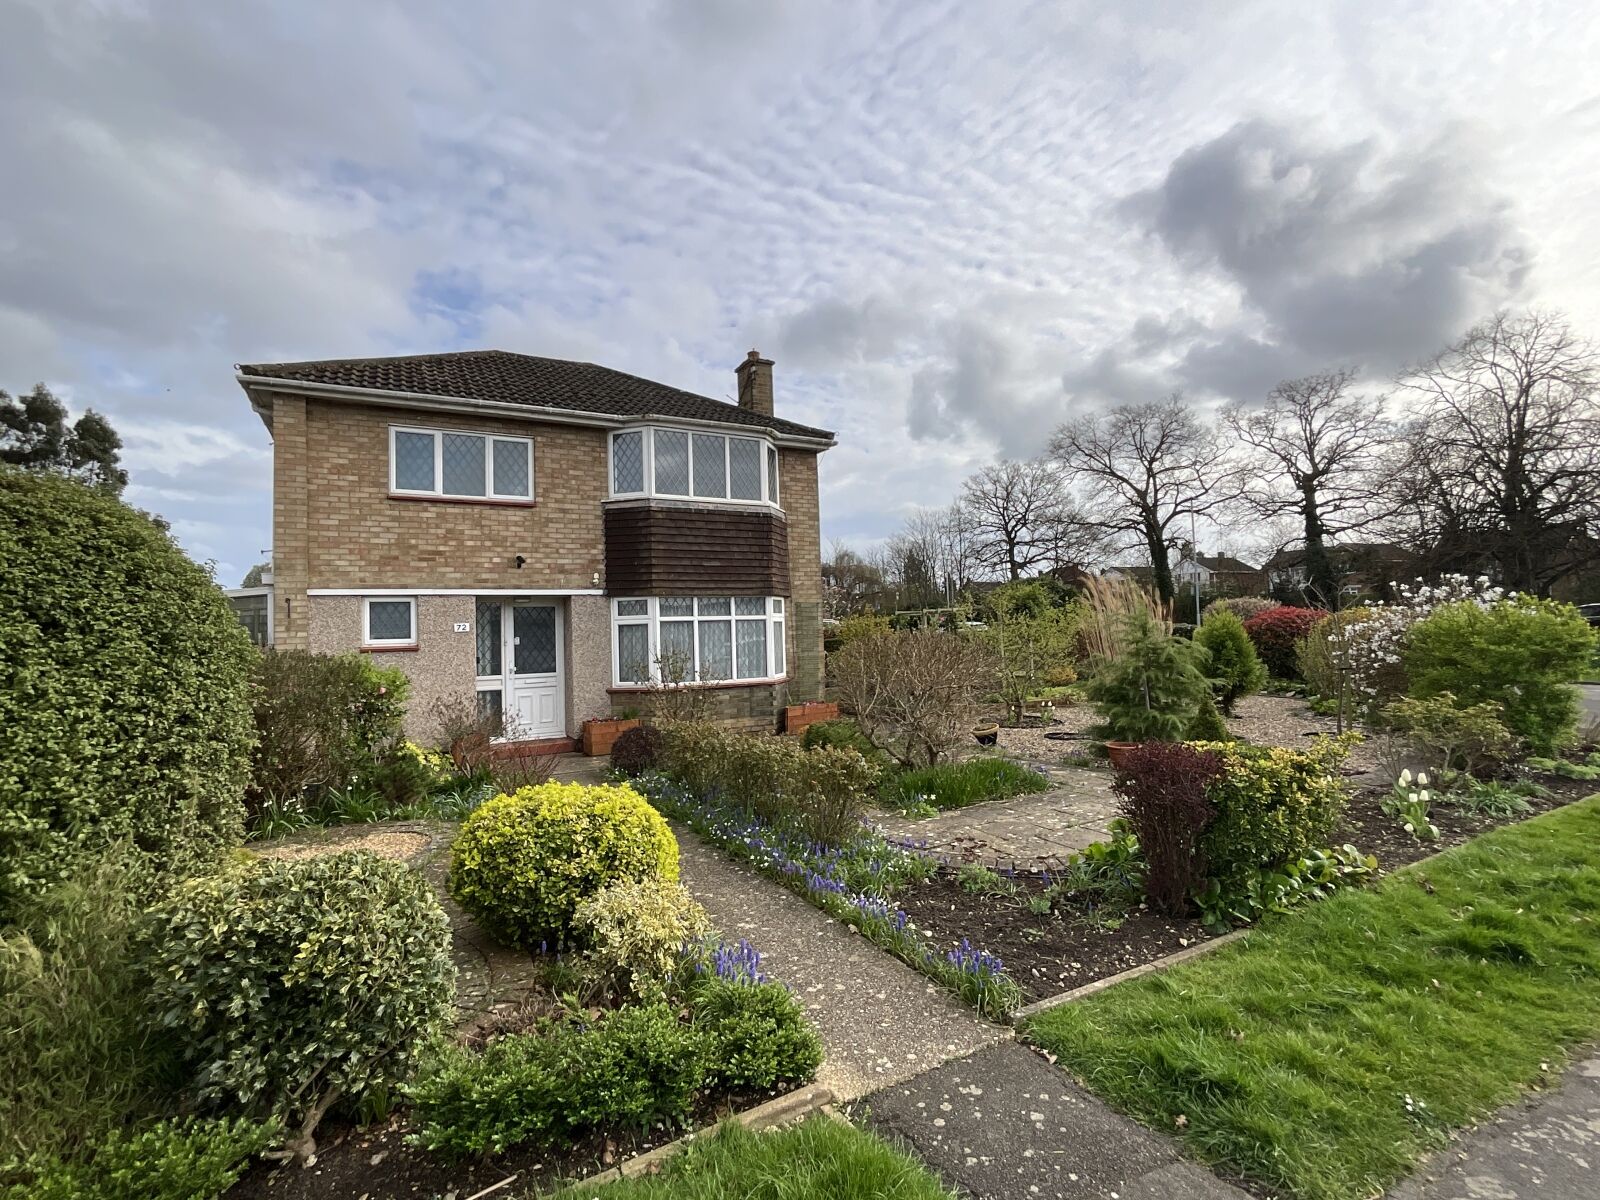 3 bedroom semi detached house to rent, Available now Arundel Road, Woodley, RG5, main image